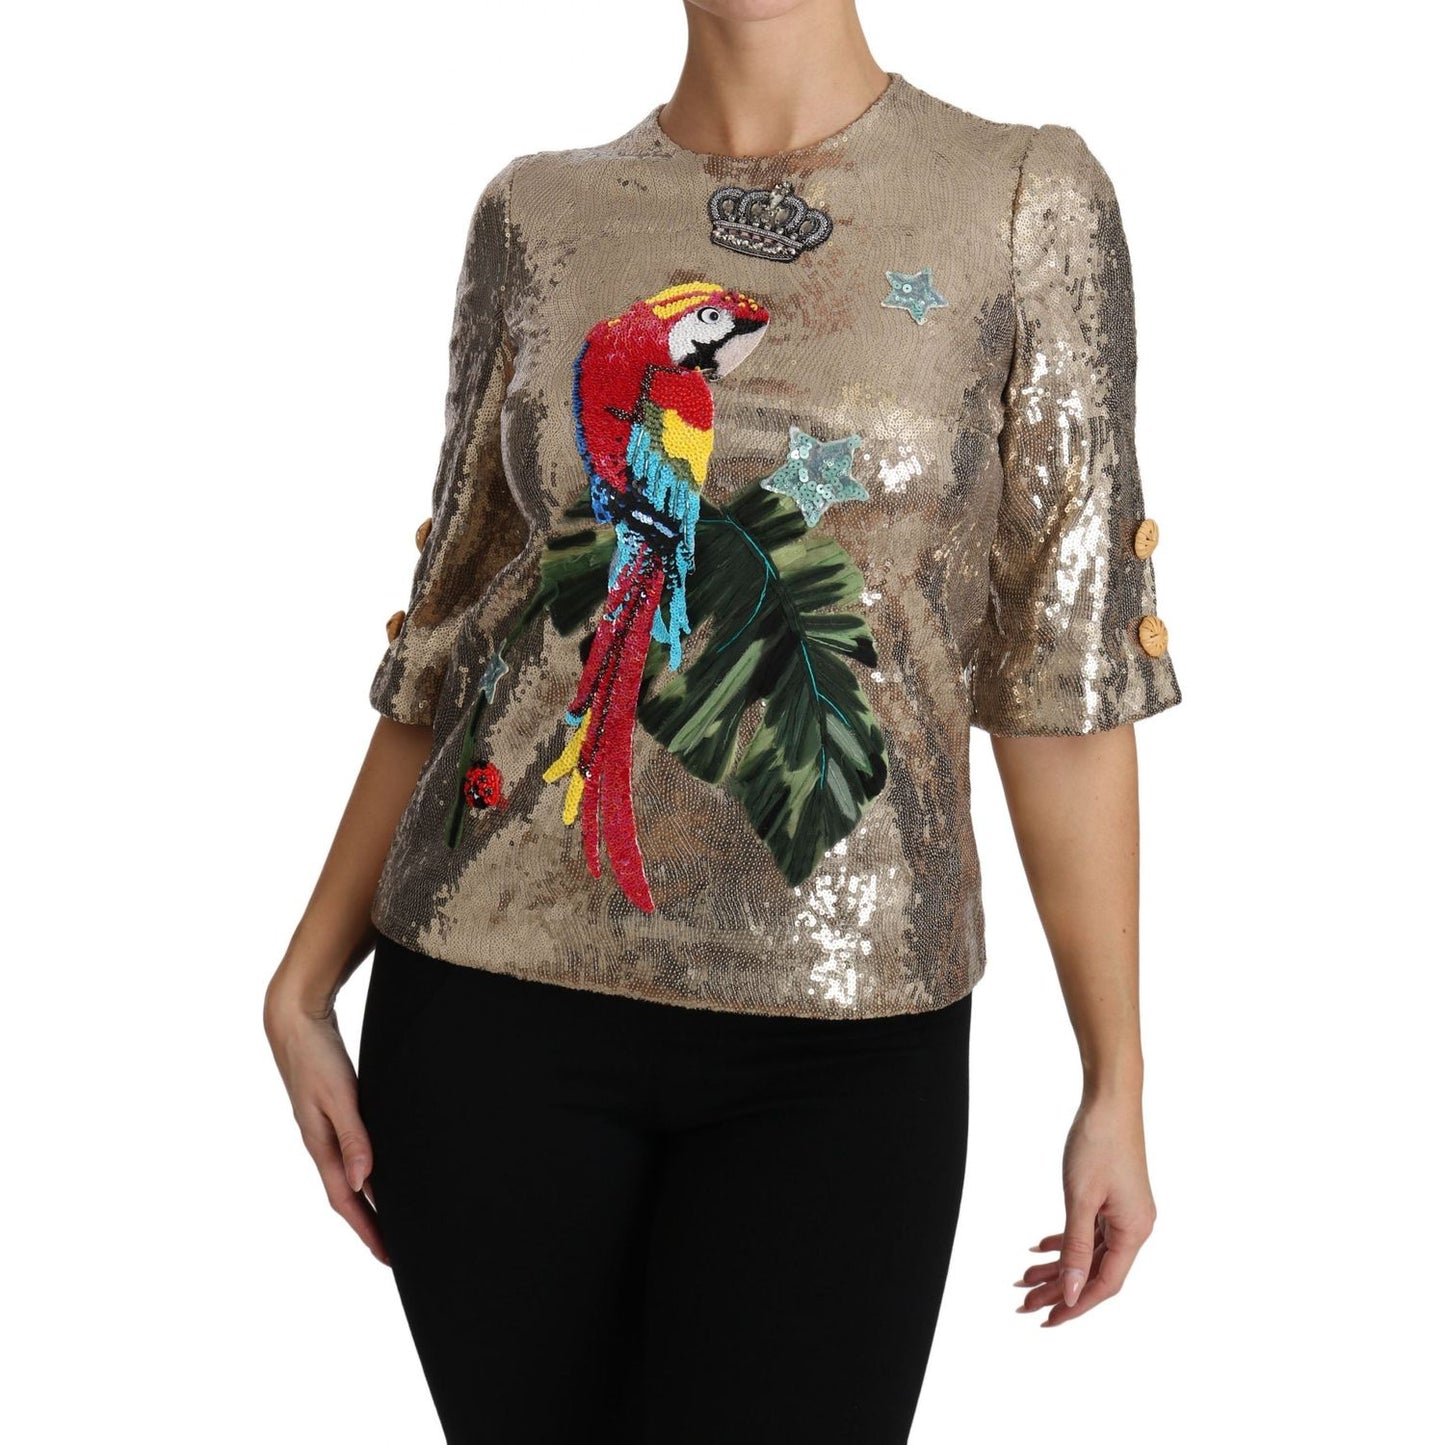 Dolce & Gabbana Gold Parrot Motif Crewneck Blouse with Crystals gold-sequined-parrot-crystal-blouse 654059-gold-sequined-parrot-crystal-blouse-3.jpg